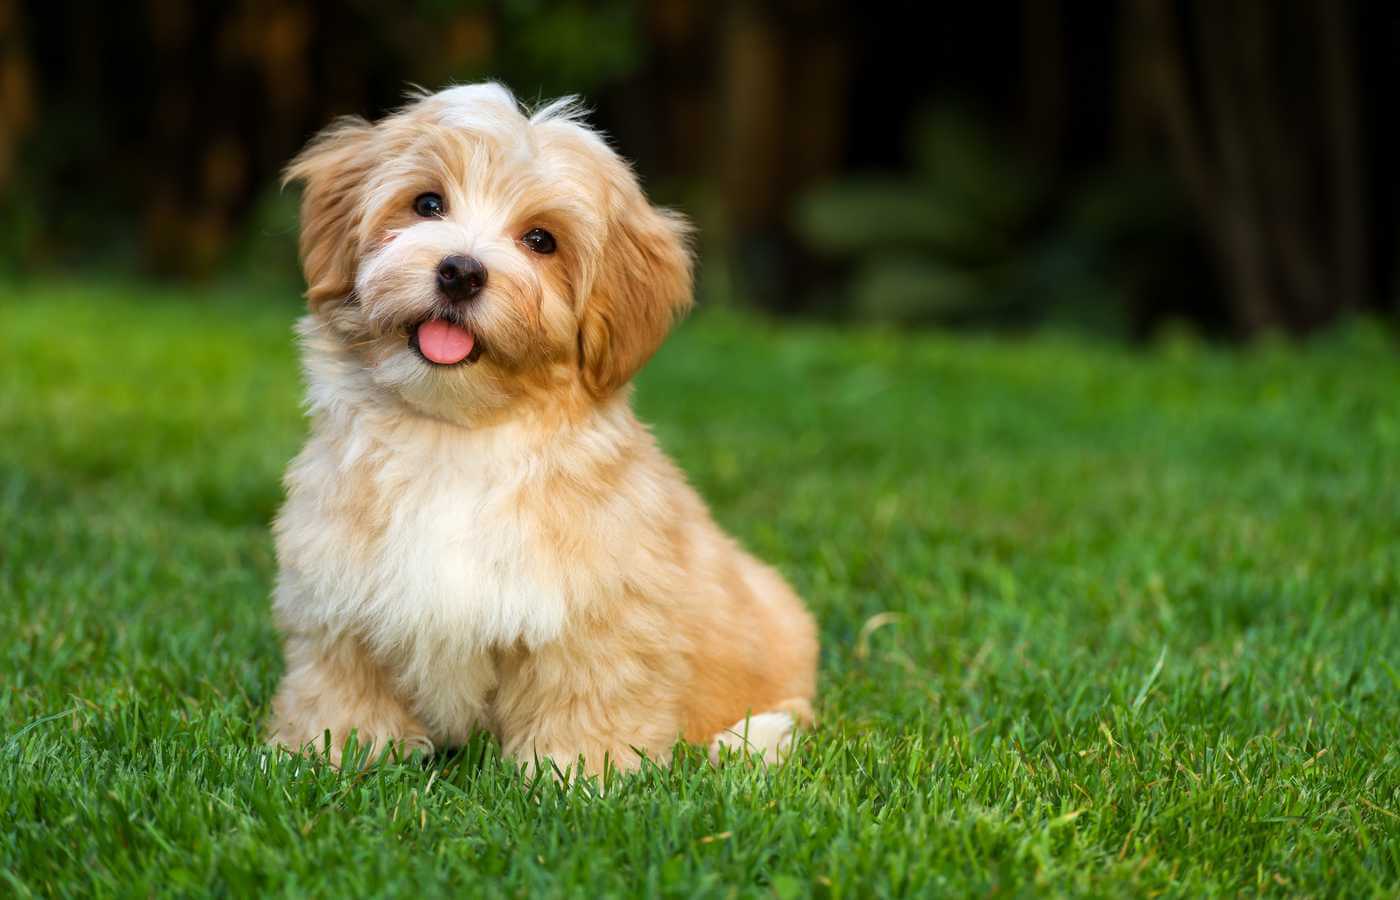 Havanese Dog Breed: Details, Cost, Origin, Facts, Image & More